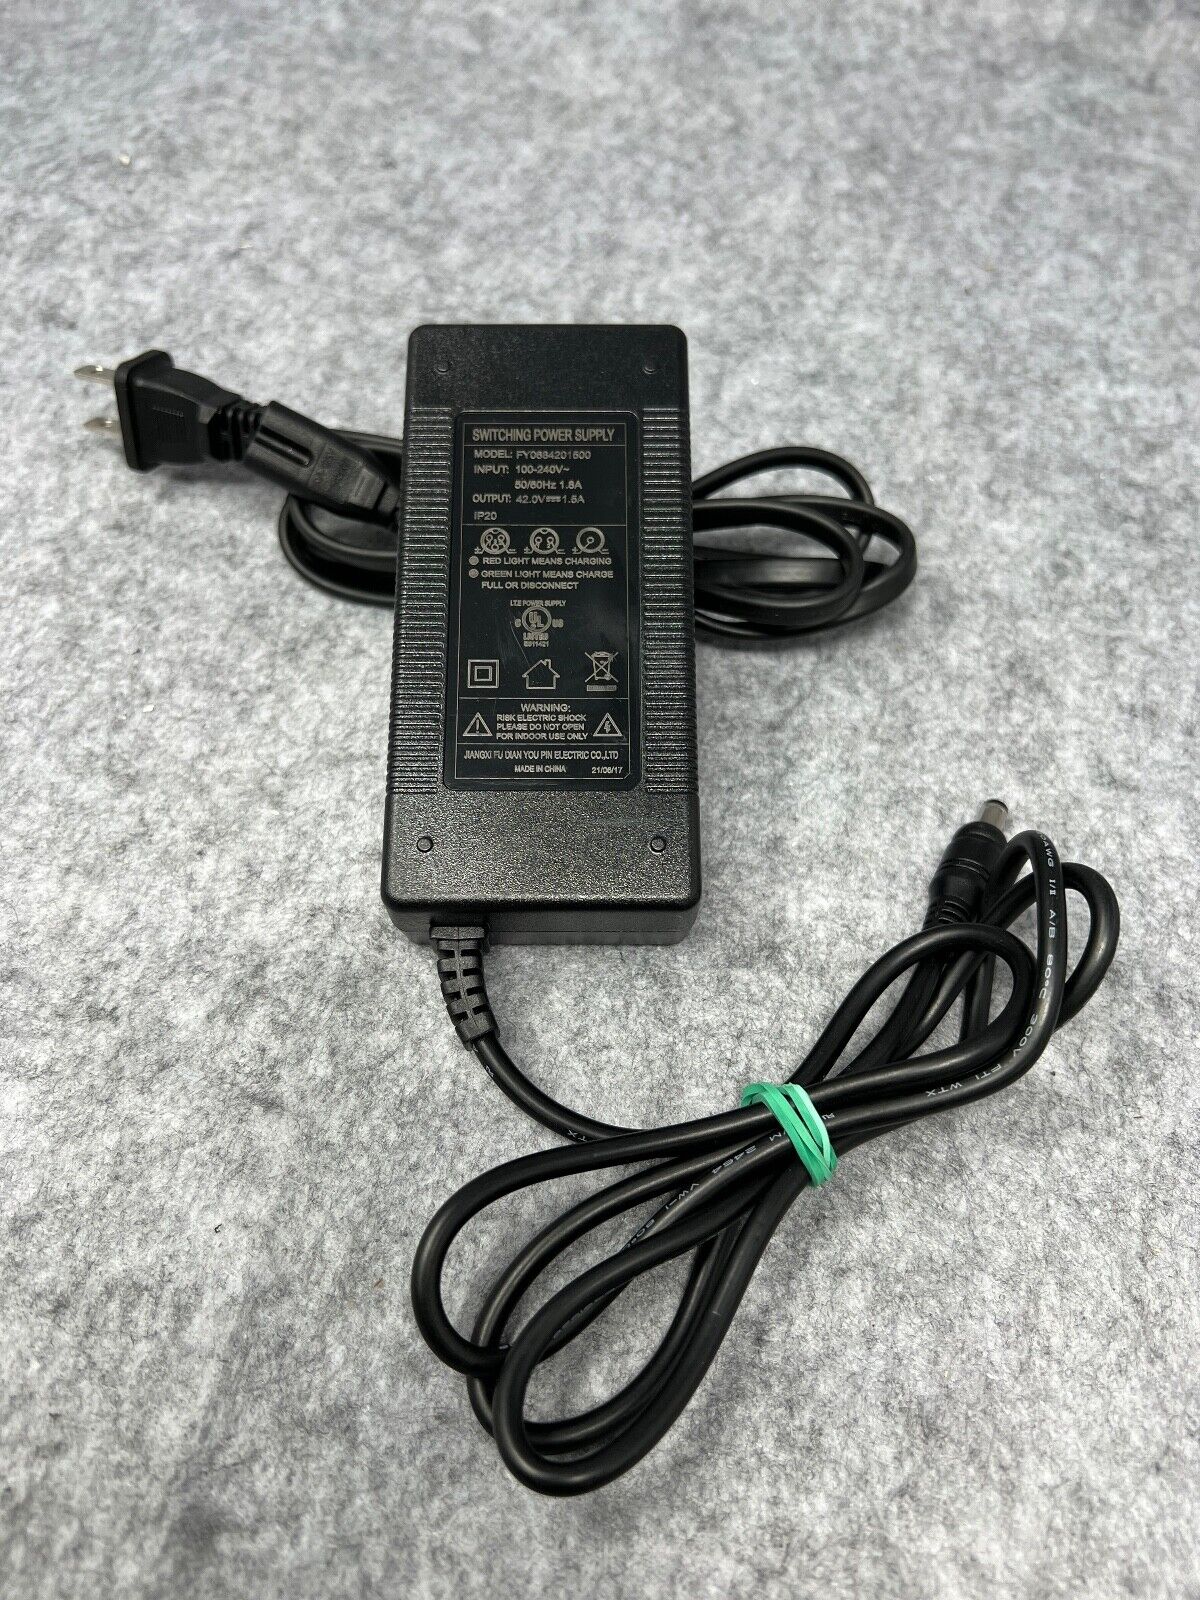 42V 1.5A (FY0634201500) GOTRAX ELECTRIC SCOOTER AC POWER ADAPTER CHARGER [USED]